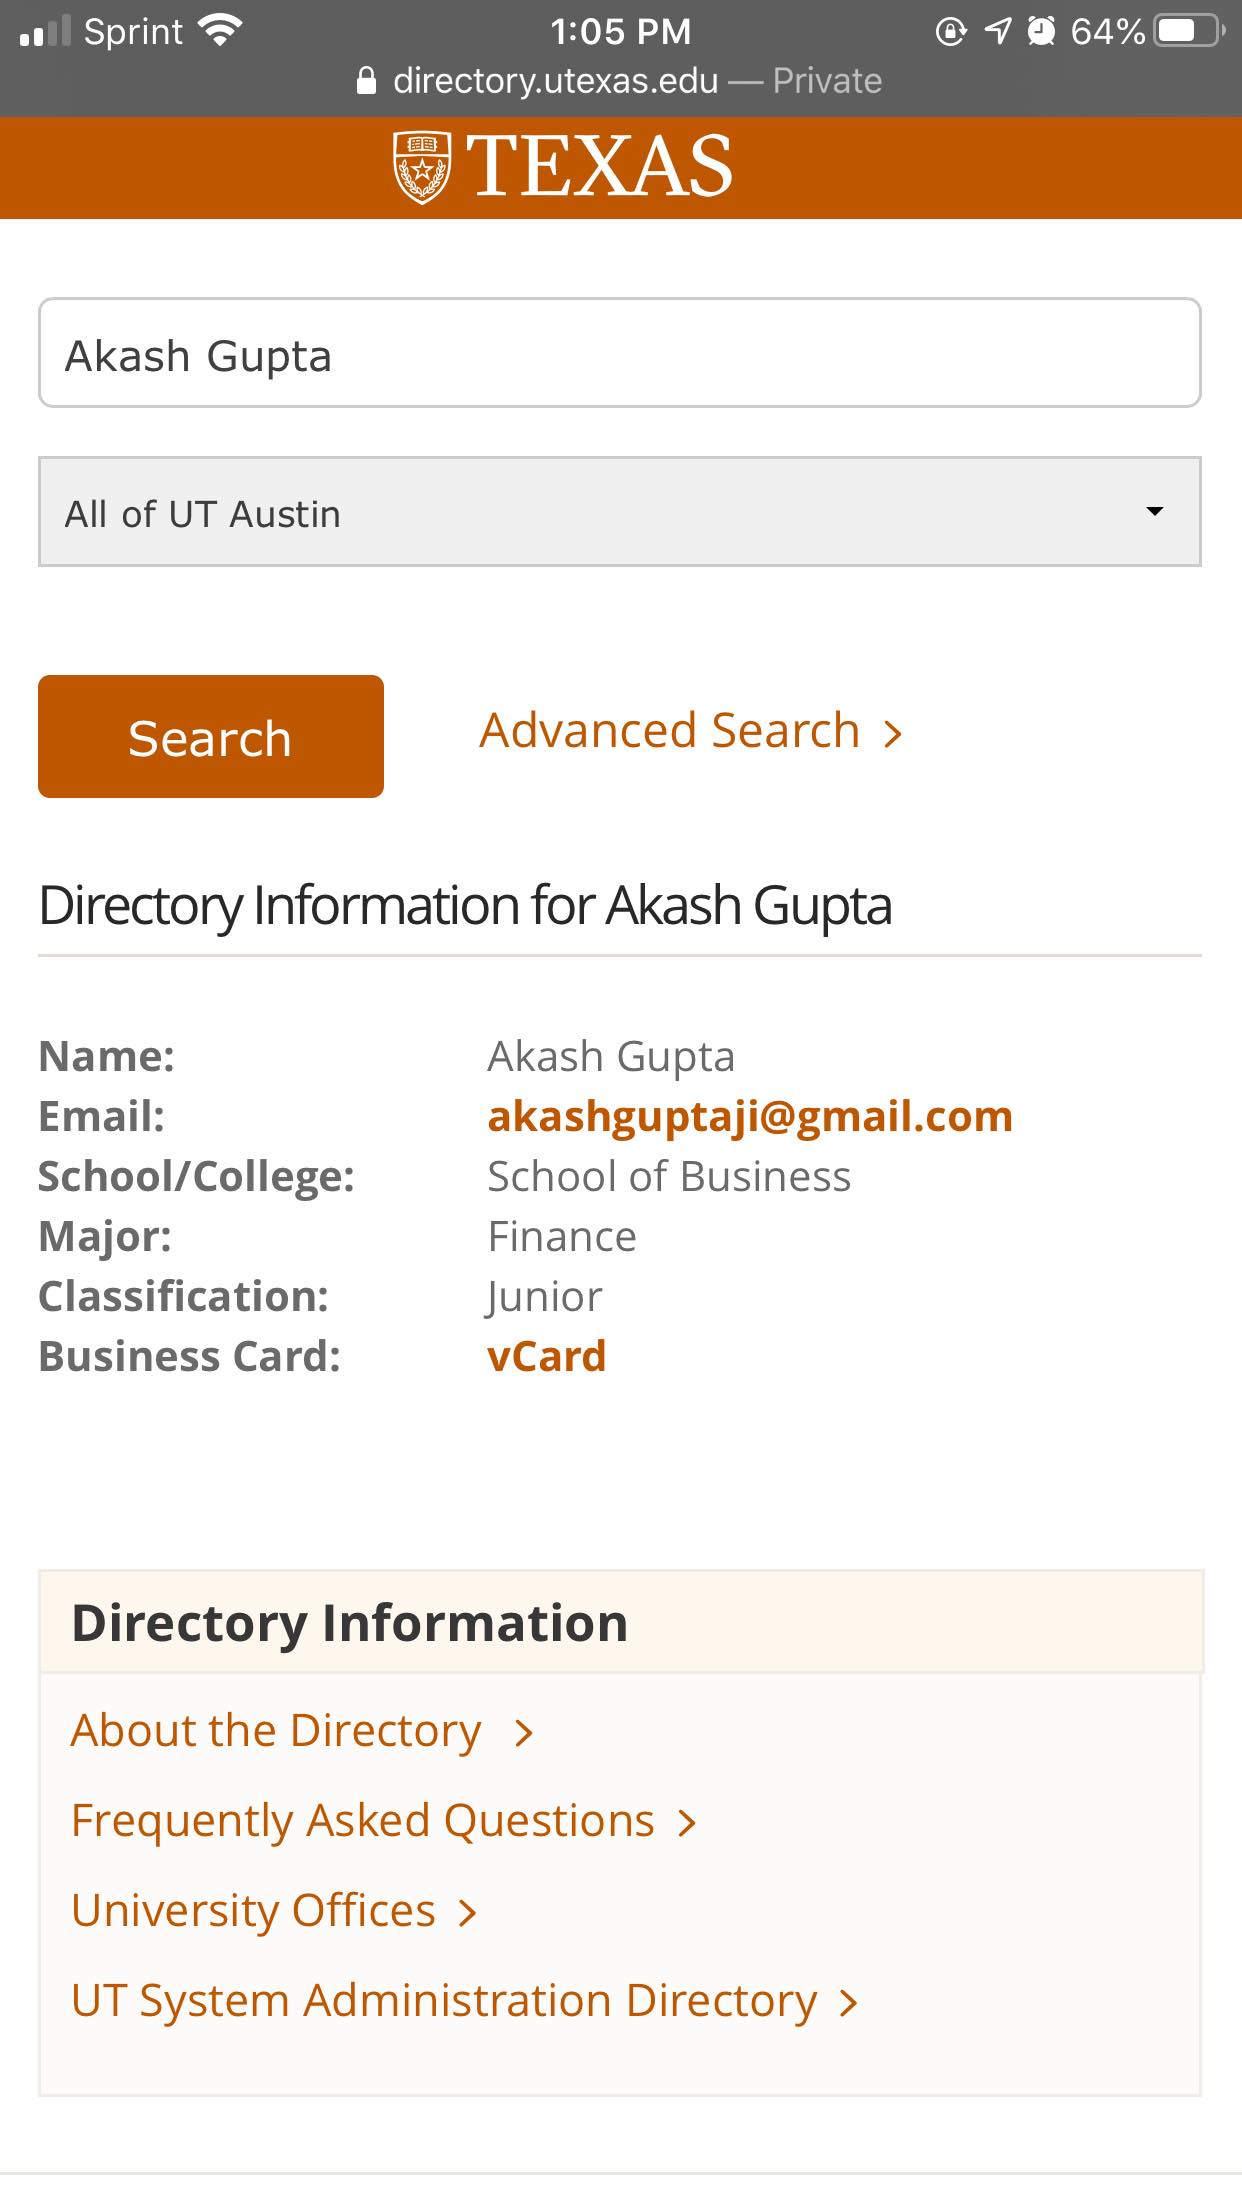 This is his information at UT. Do not trust him.